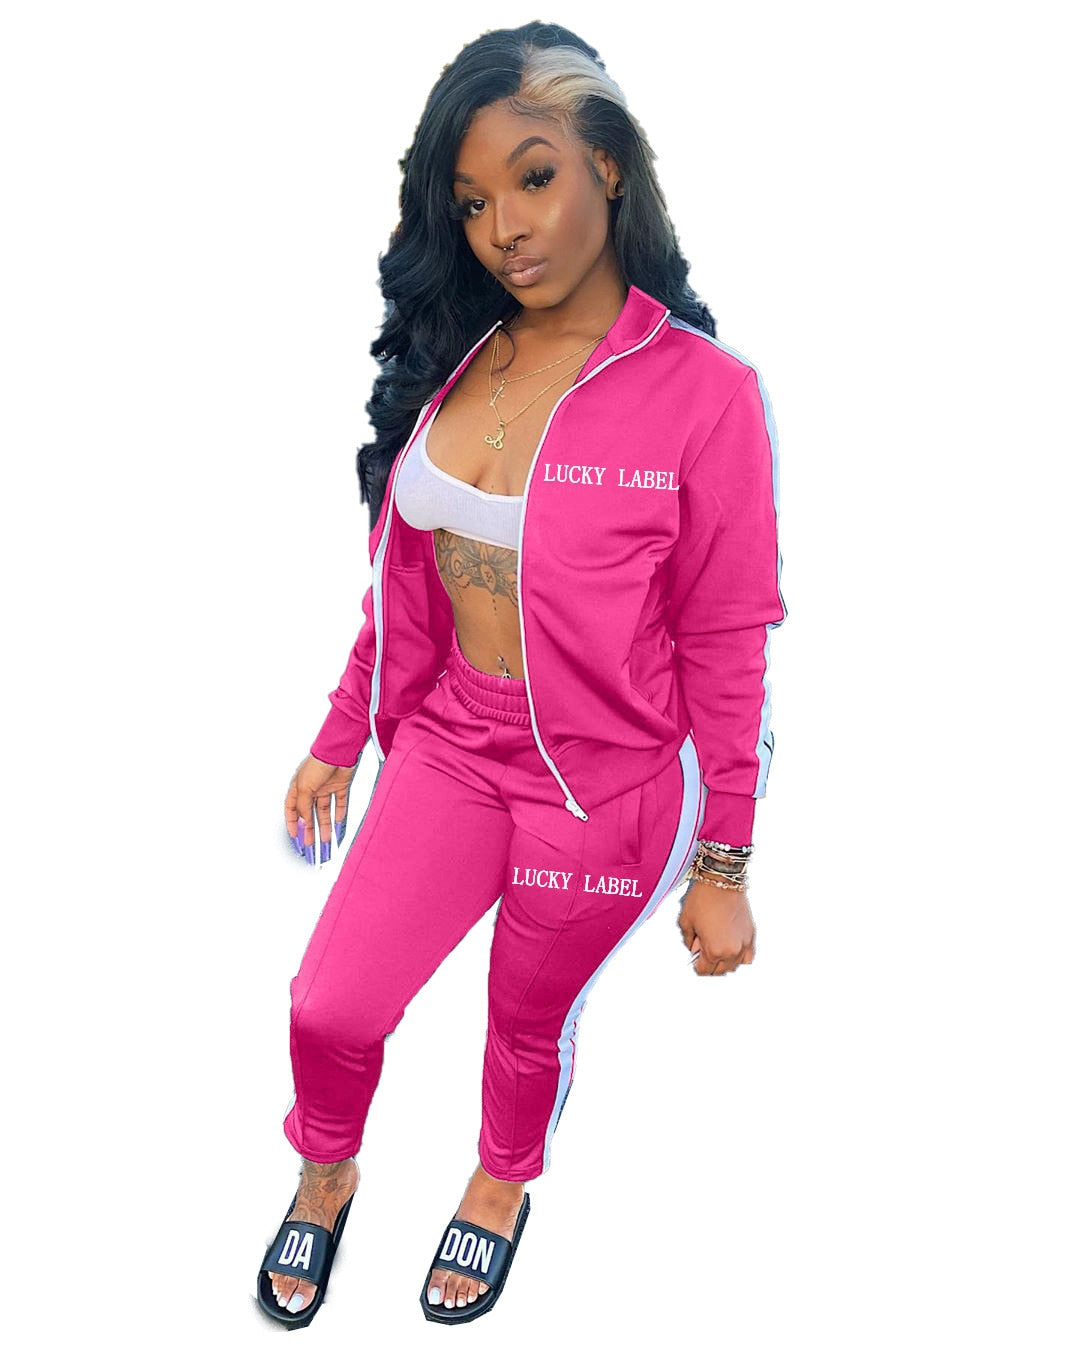 Ronikasha Women Two Piece Pants Set Sportswear Letter Lucky Label Embroidery Patchwork Zipper Tops + Sport Leggings Tracksuits